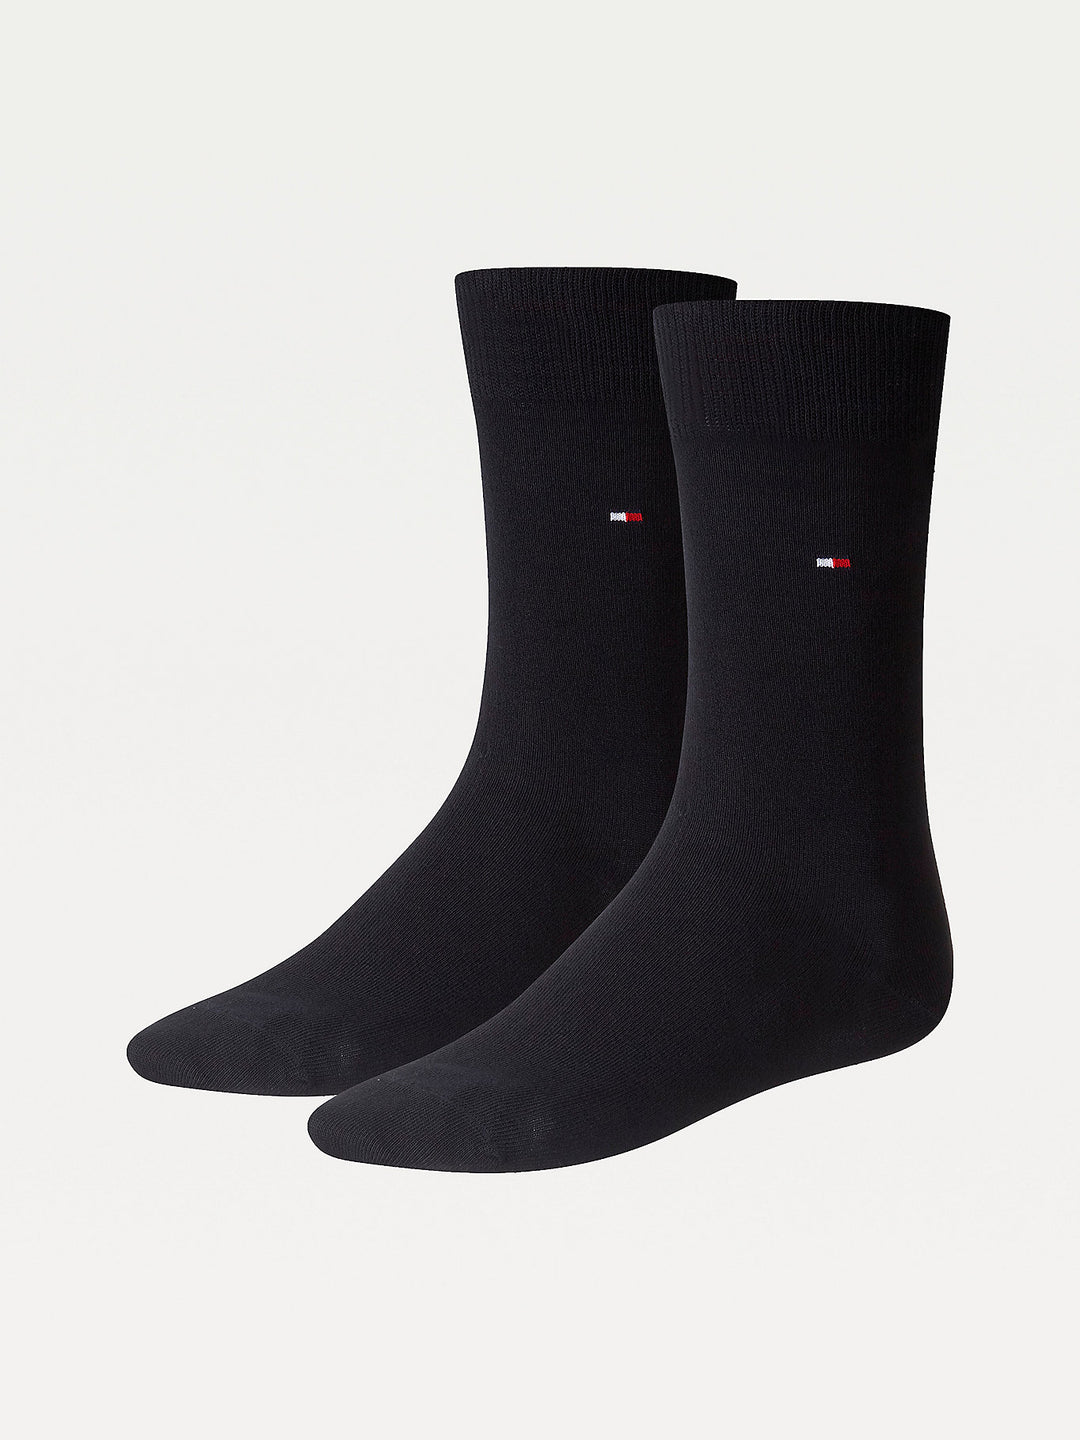 TOMMY HILFIGER MENS SOCK CLASSIC 2 PACK - NAVY